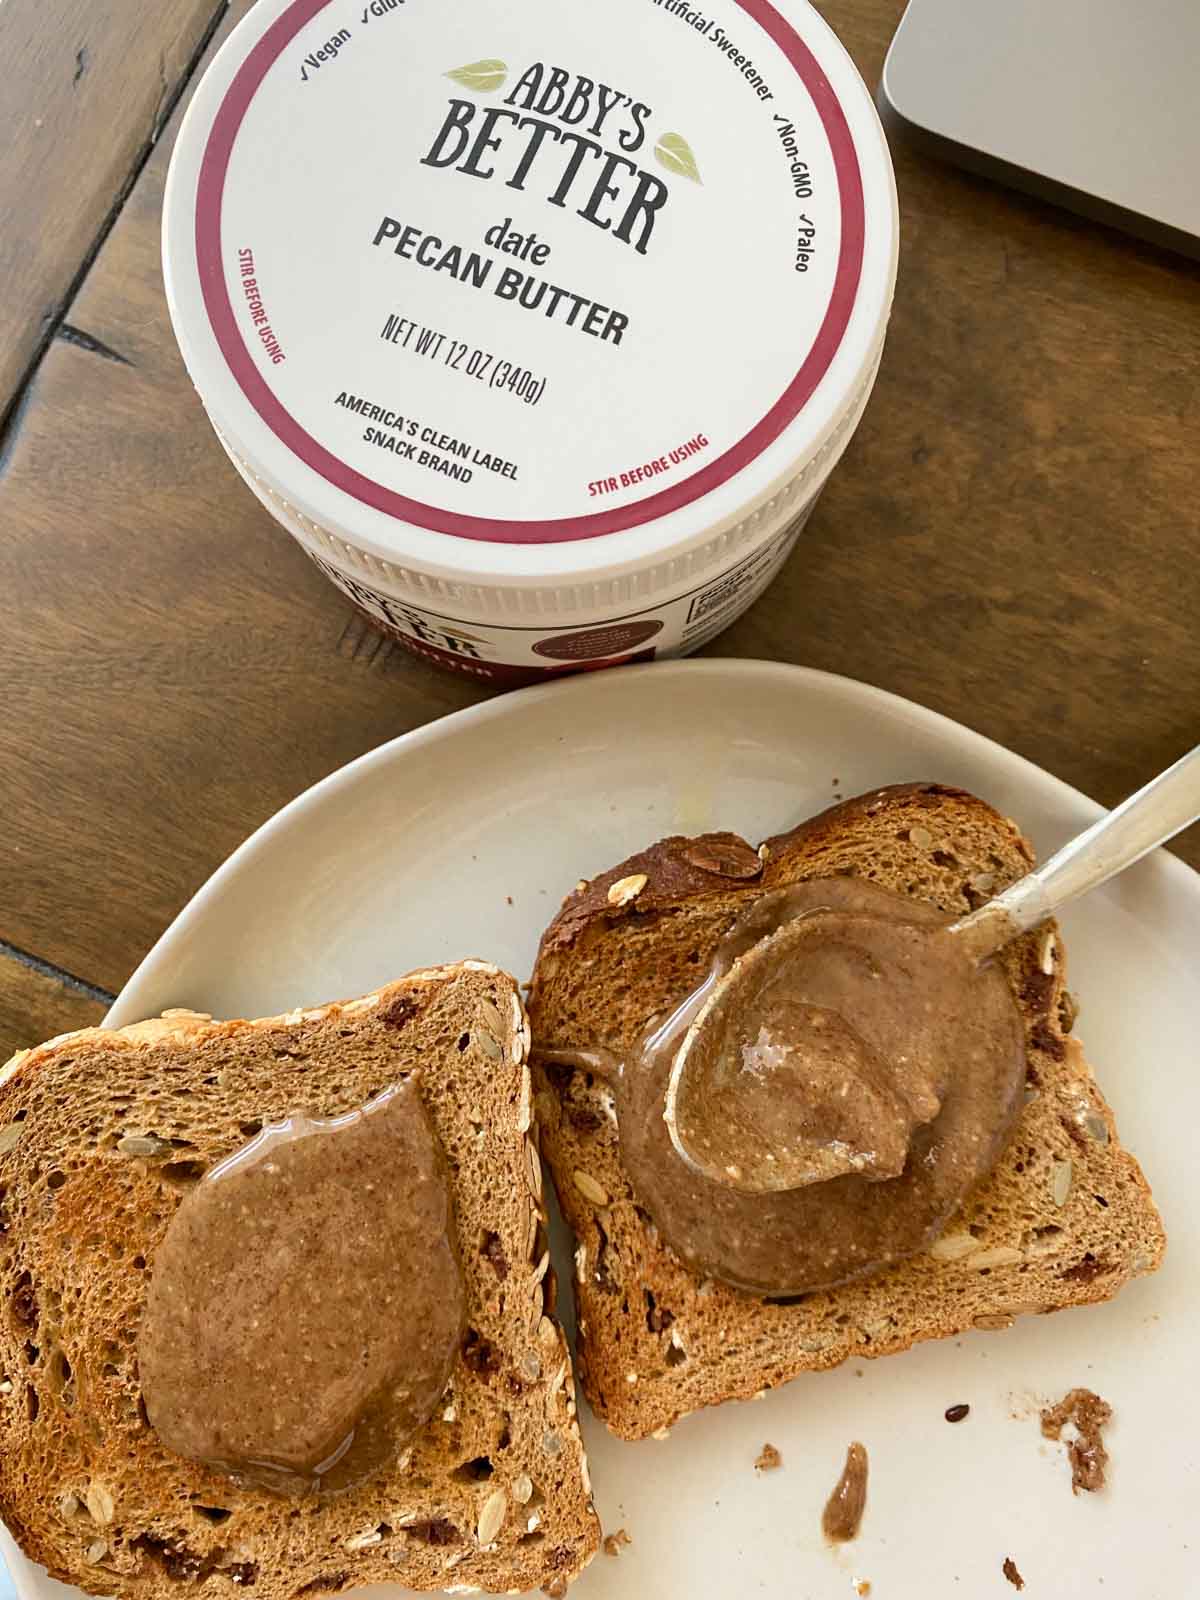 date pecan butter being spread on toast on white plate